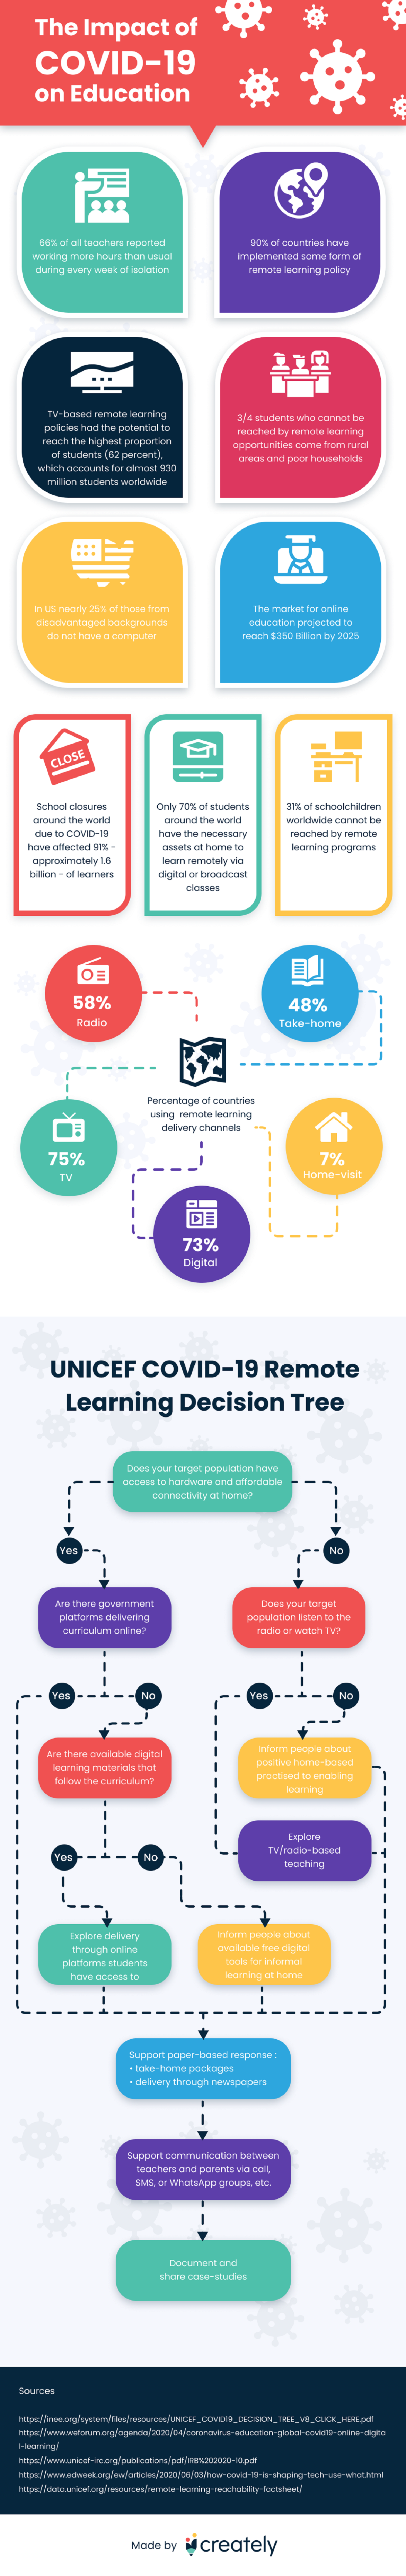 the-impact-of-covid-19-on-education-infographic